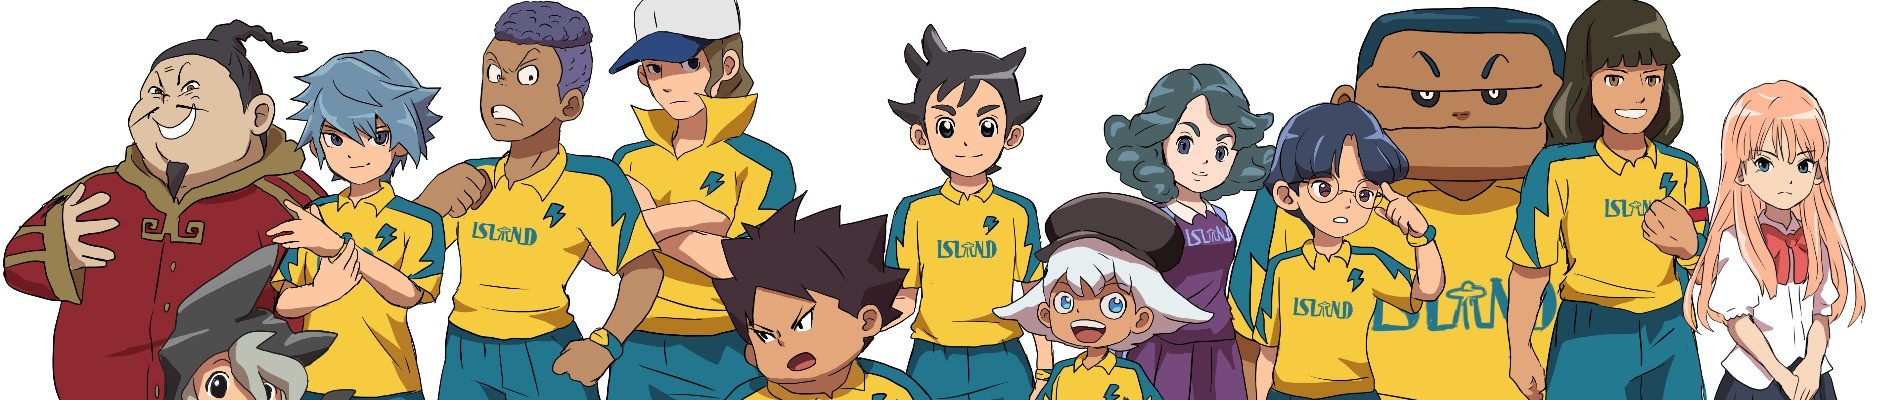 inazuma eleven ares no tenbin video game release date japanese websire